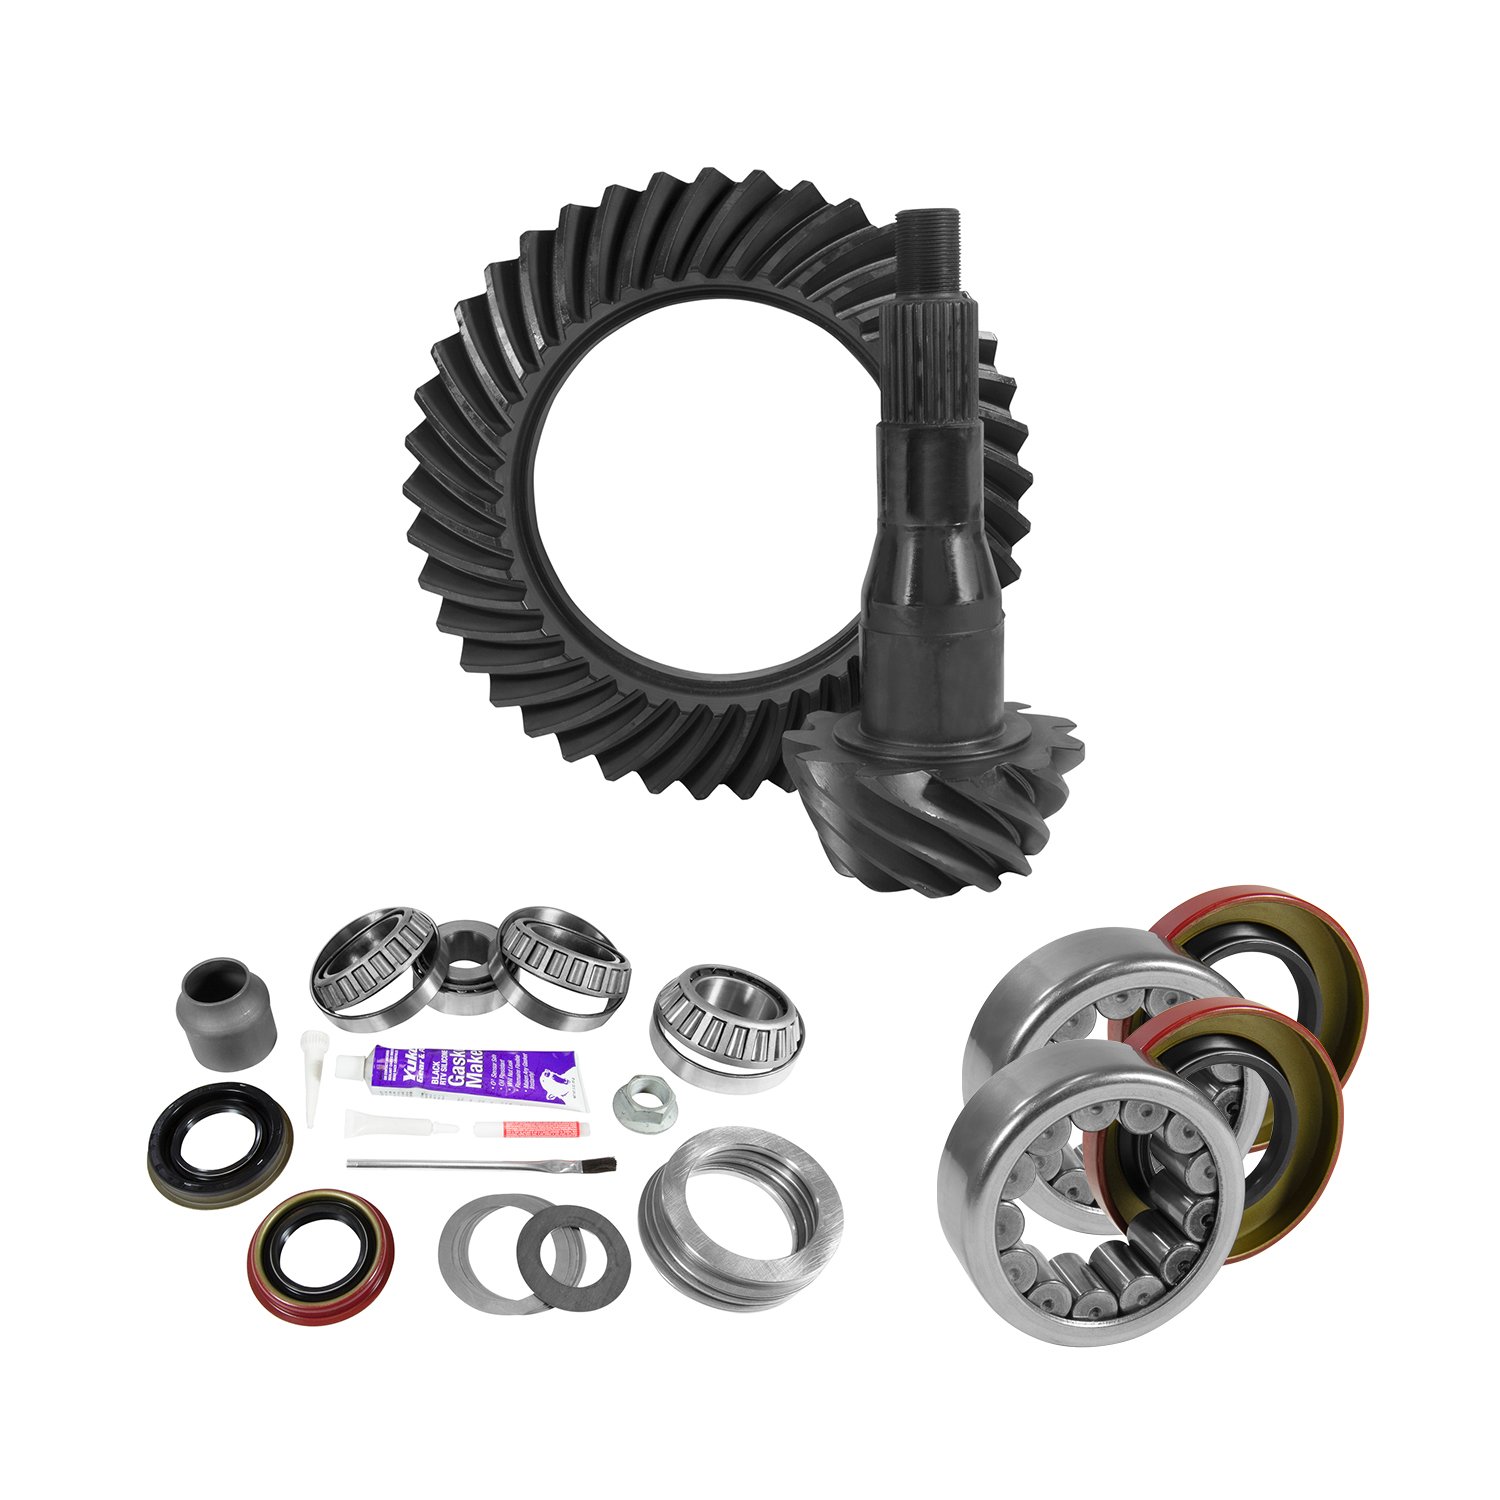 USA Standard 10806 9.75 in. Ford 3.73 Rear Ring & Pinion Install Kit, 2.99 in. Od Axle Bearings & Seals